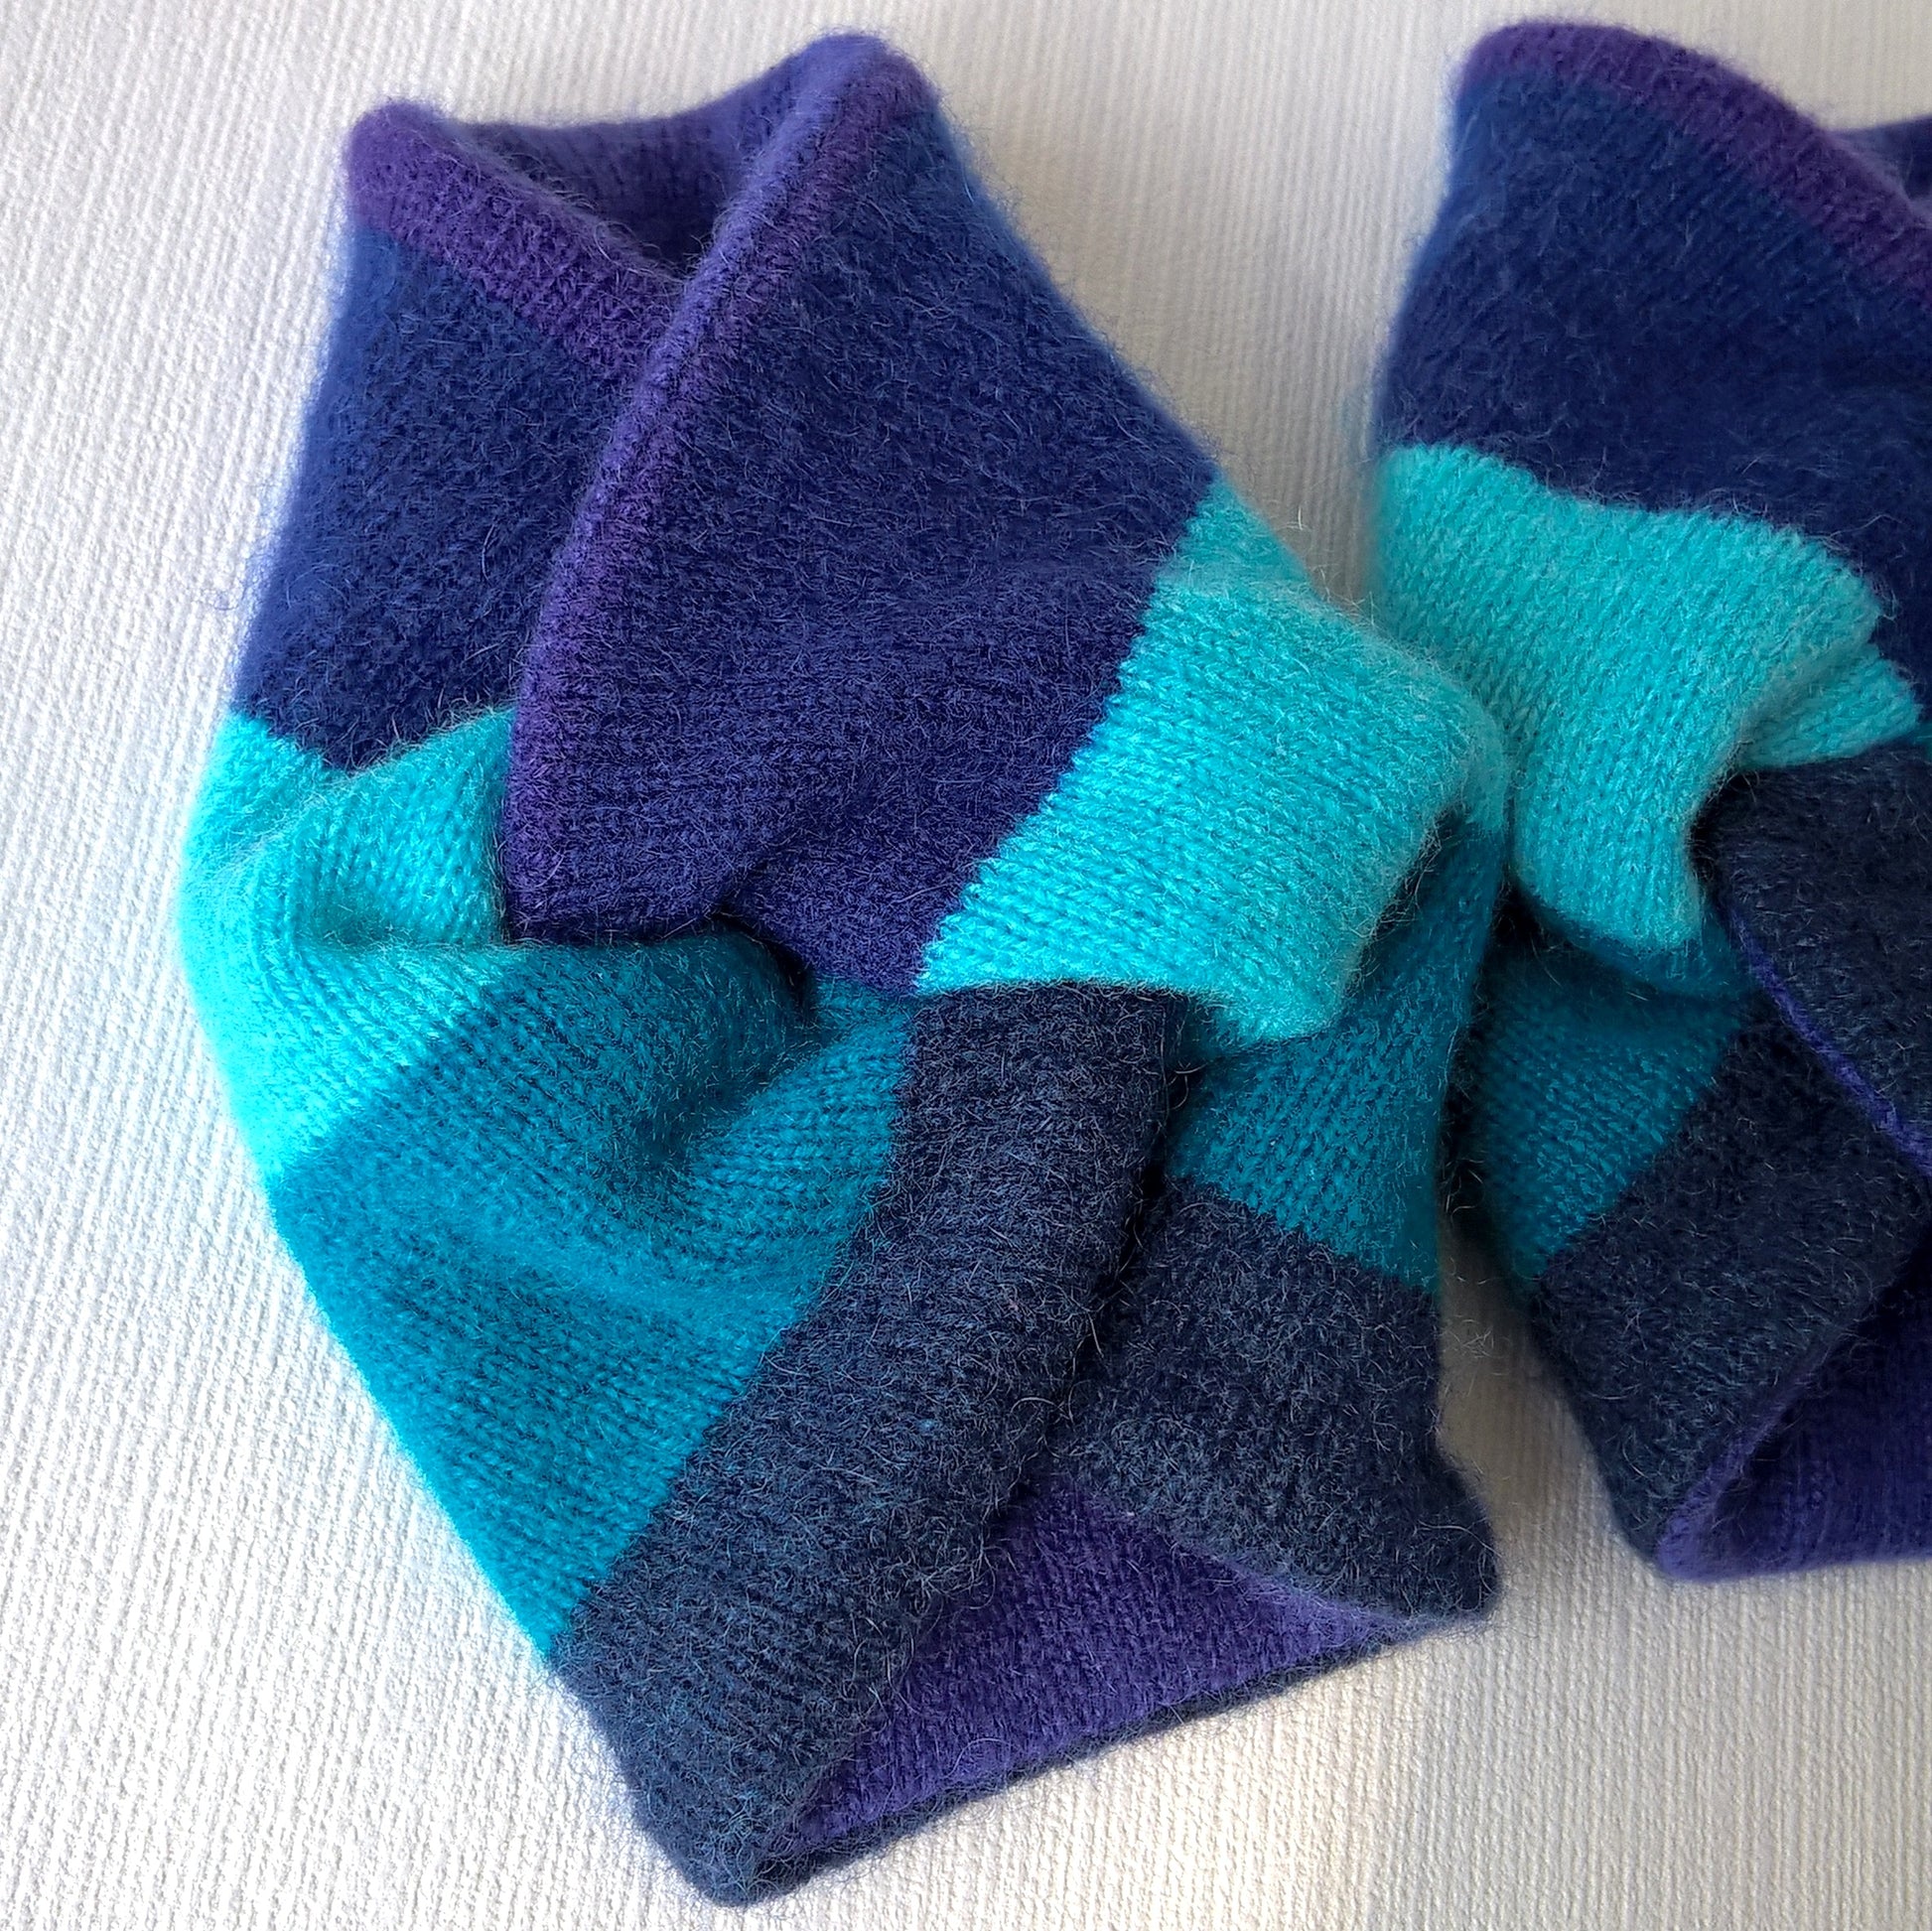 Green and navy stripe cashmere wrist cuffs lined with purple cashmere